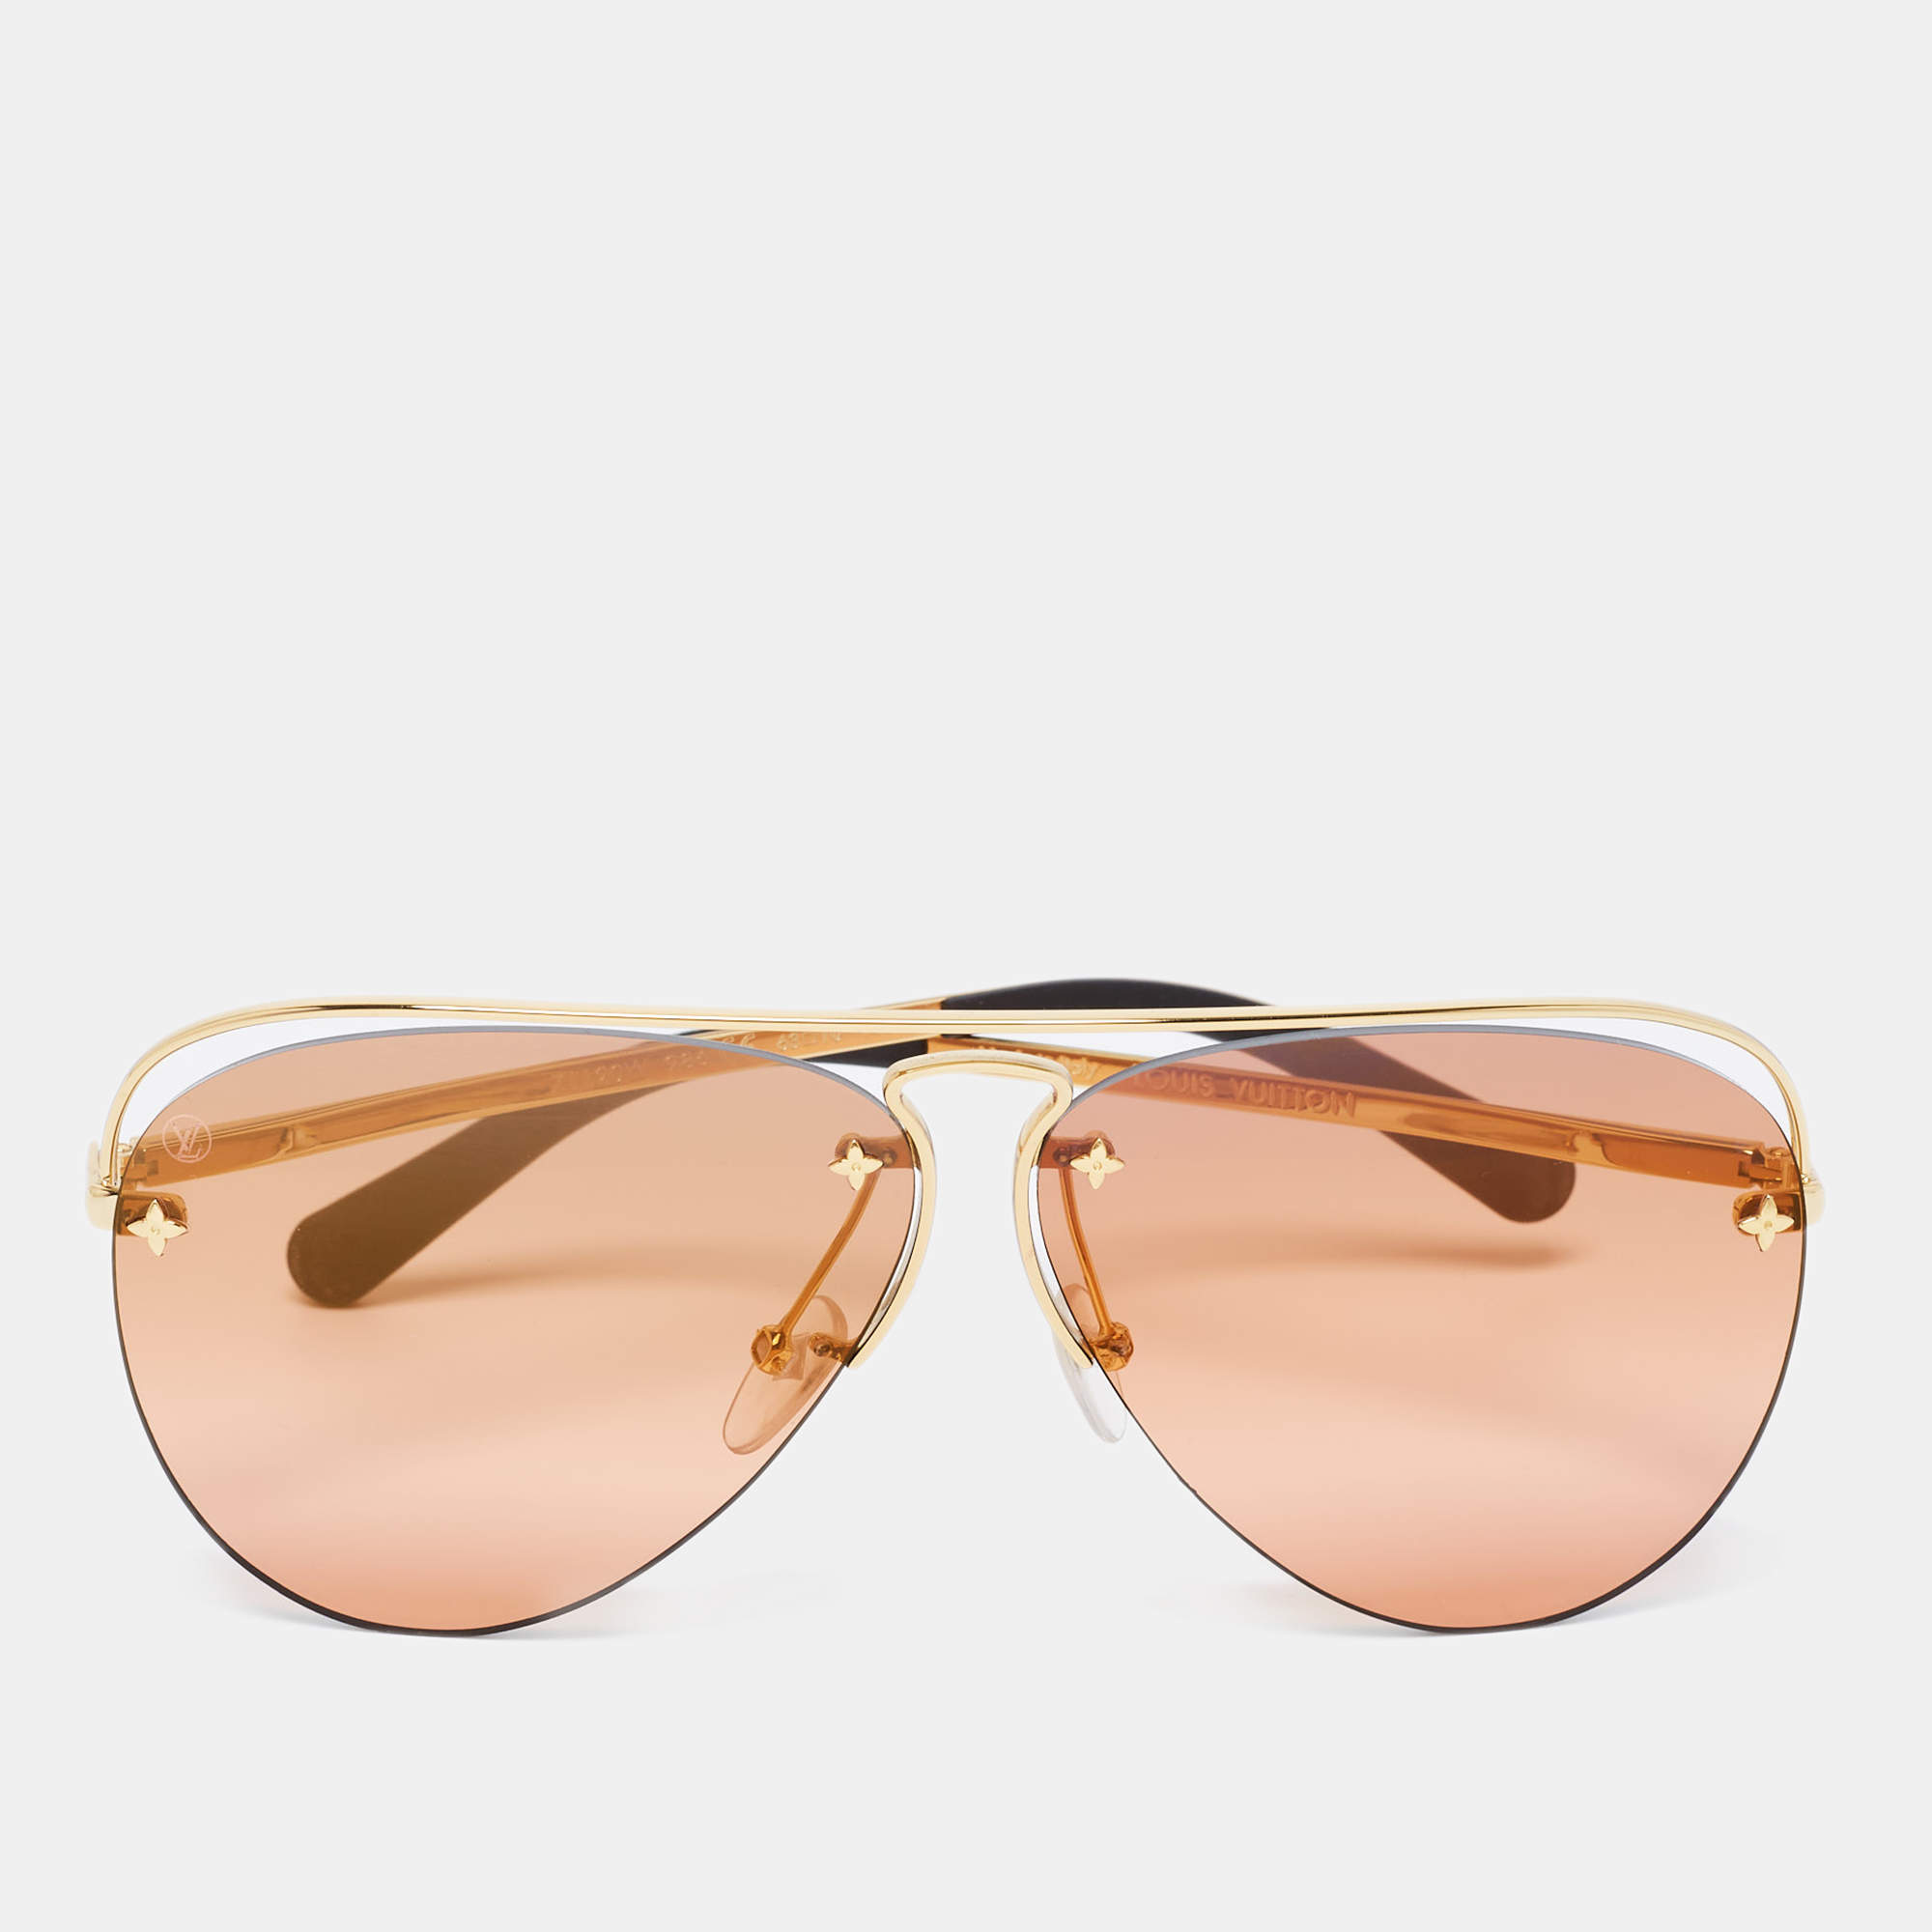 Trying to find these LV Grease aviator sunglasses. Anyone know of